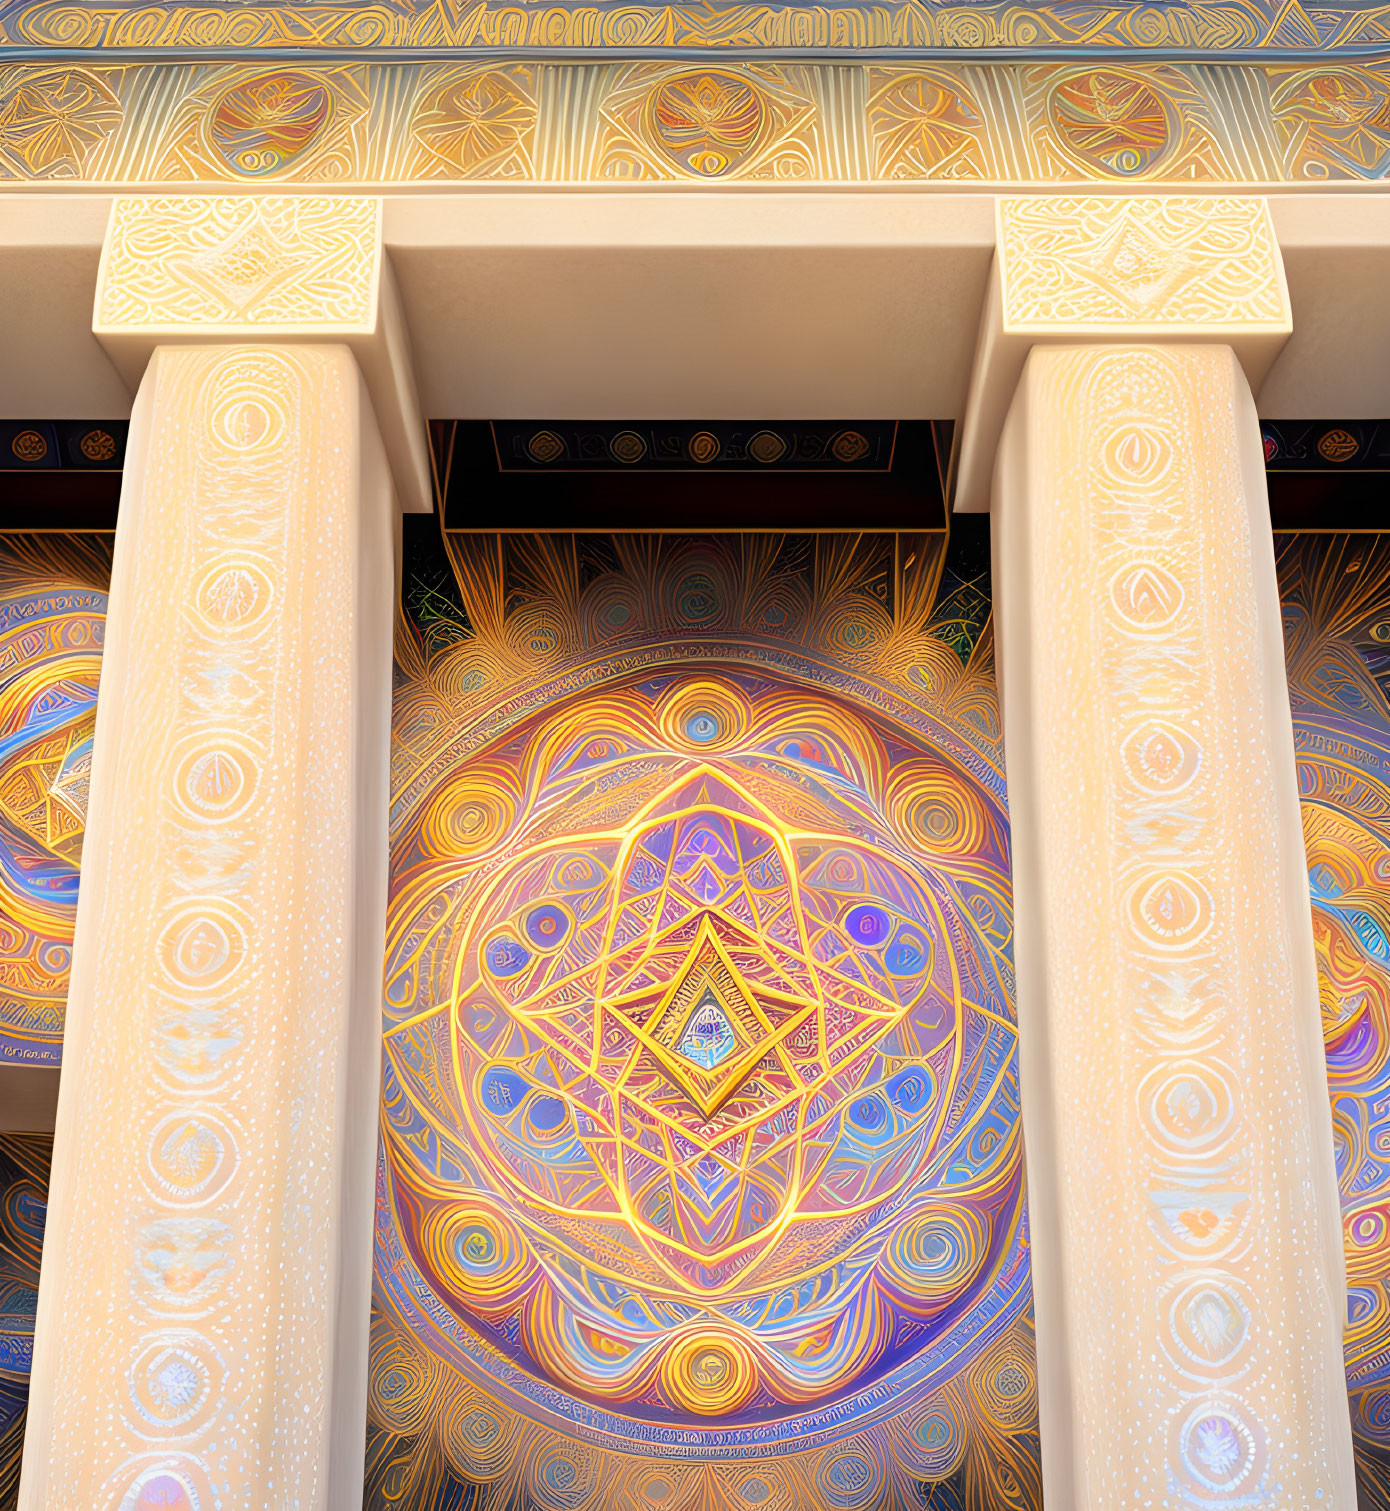 Colorful geometric mandala pattern framed by intricate columns and archway